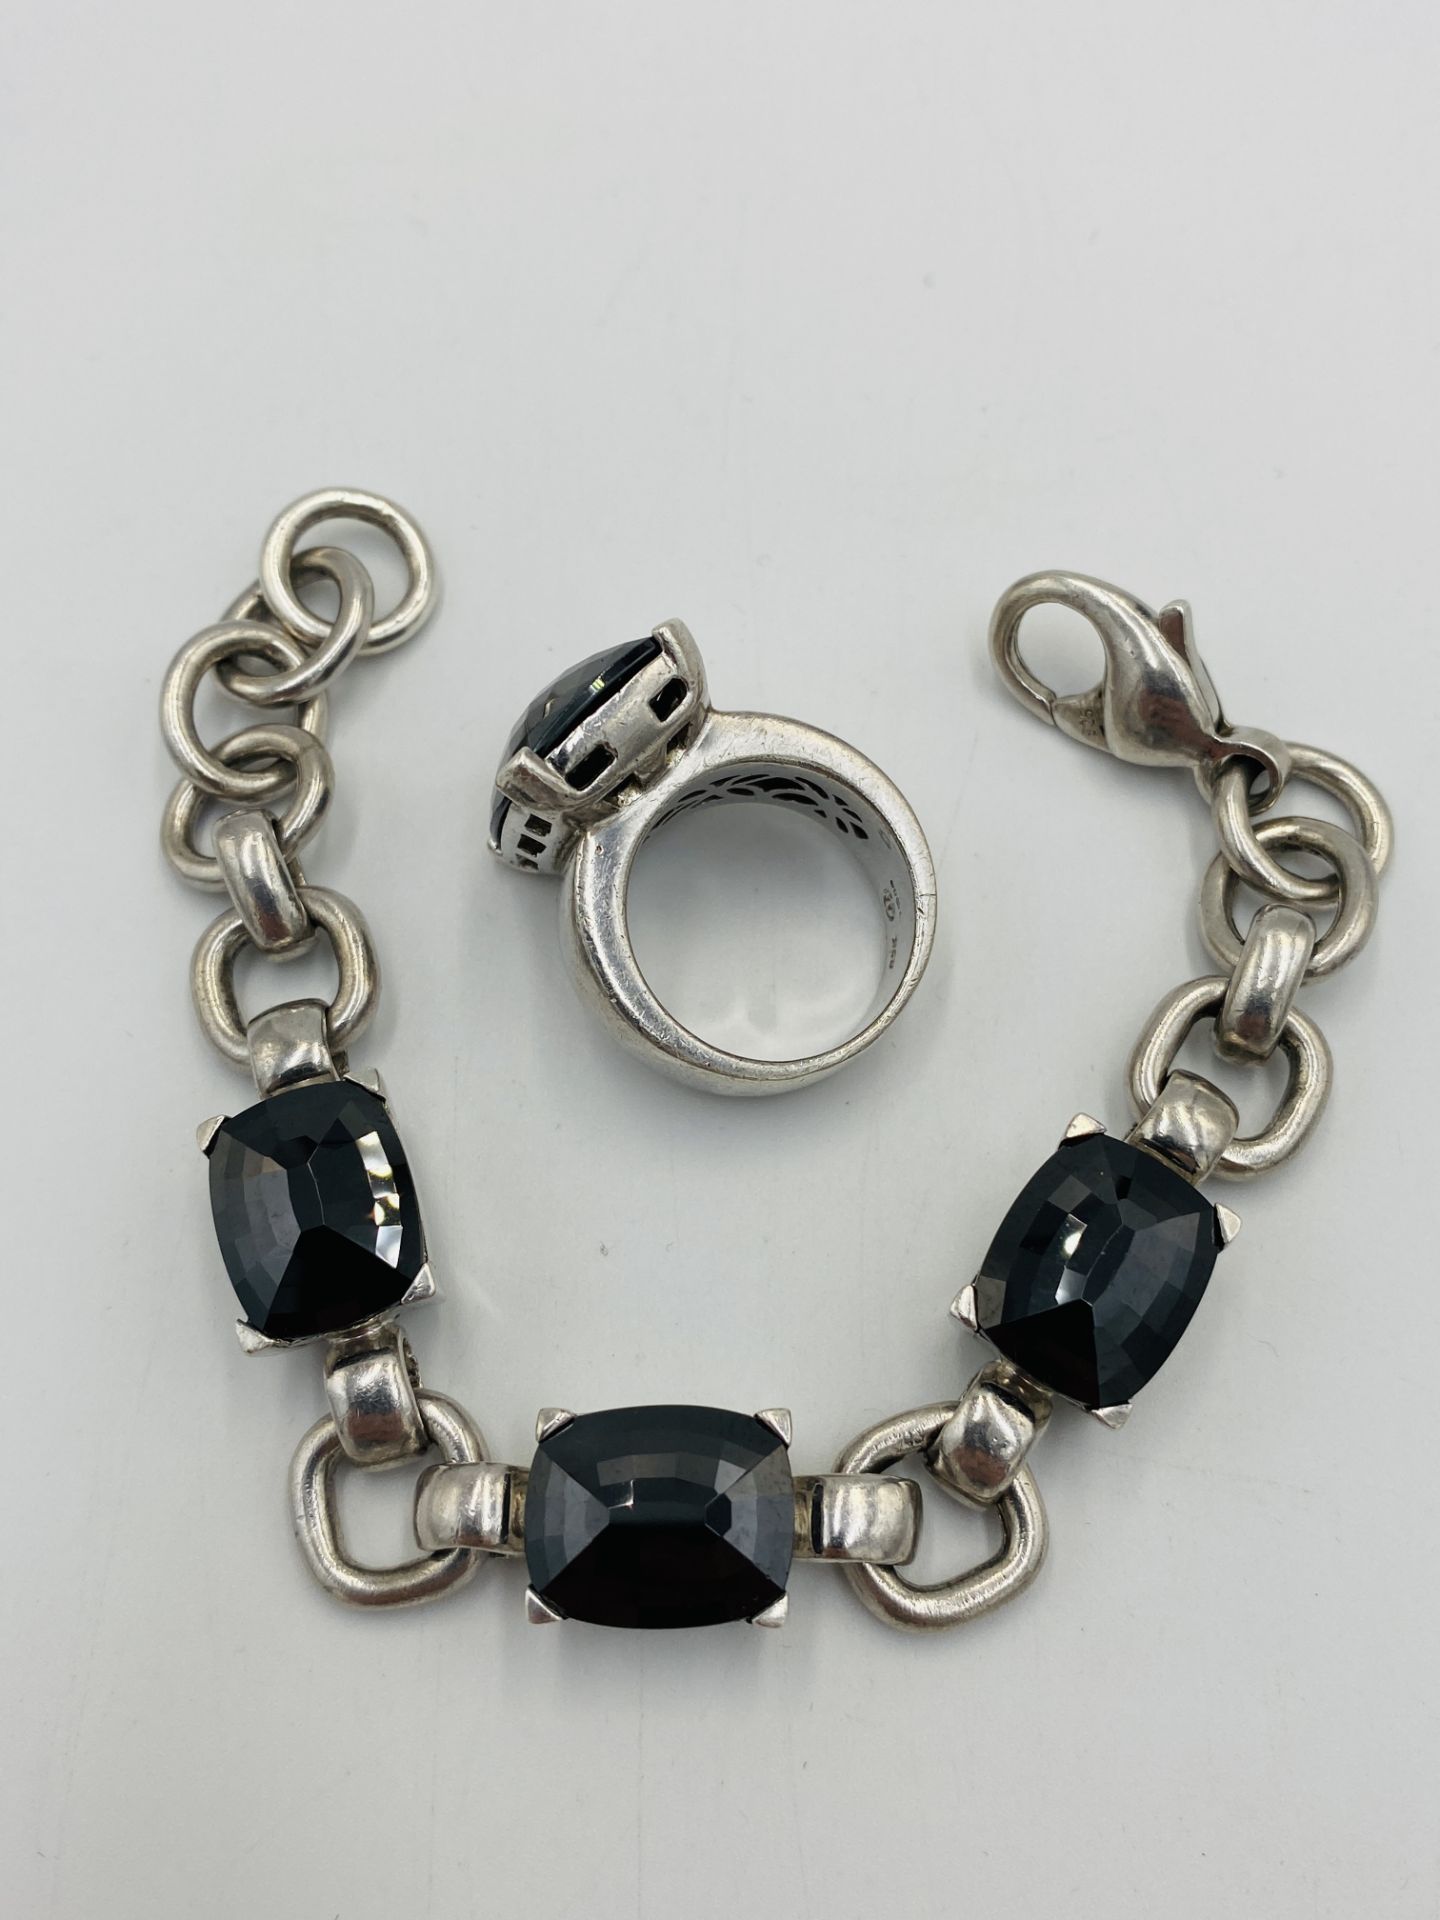 Silver ring with matching bracelet - Image 4 of 4